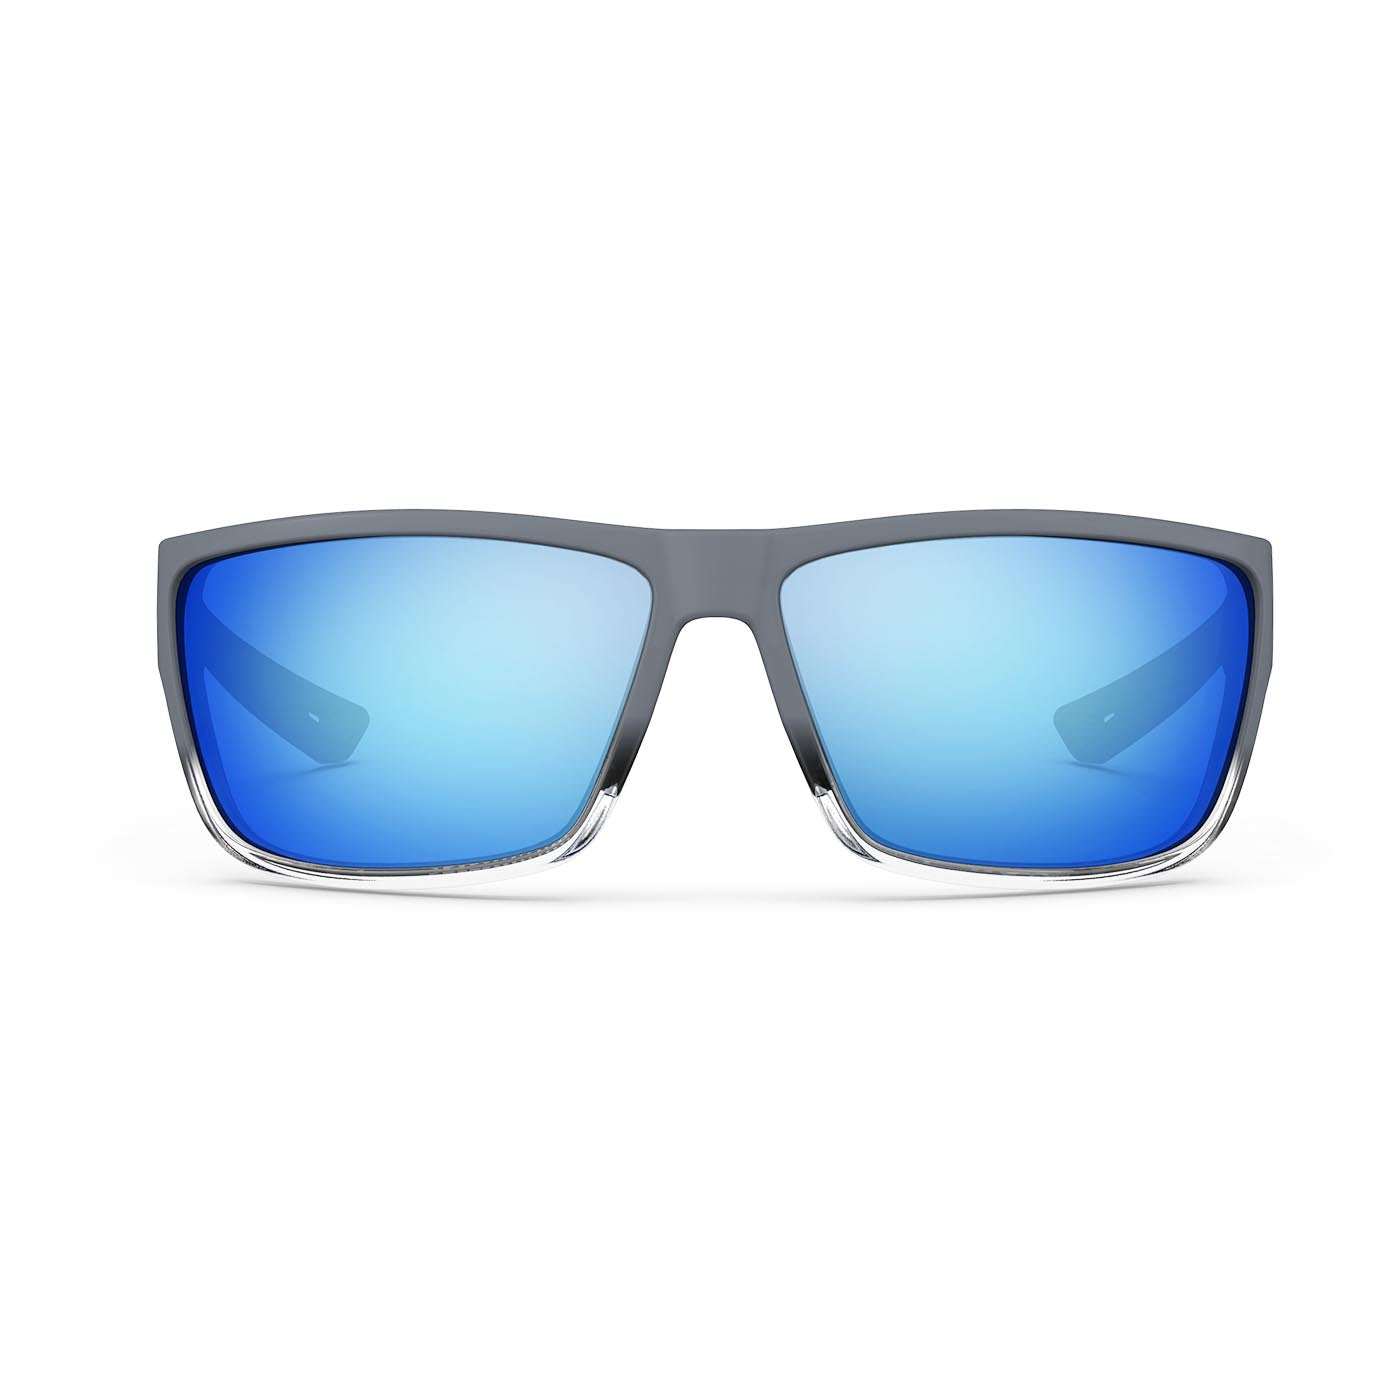 Pure Polarized Sports and - Ideal Matte To Flexible - Golf, Ideal Fishing Women Transparent and Adjustable Half - - Warranty with for Lifetime Grey Men Sunglasses and Running, Frame Cycling, for